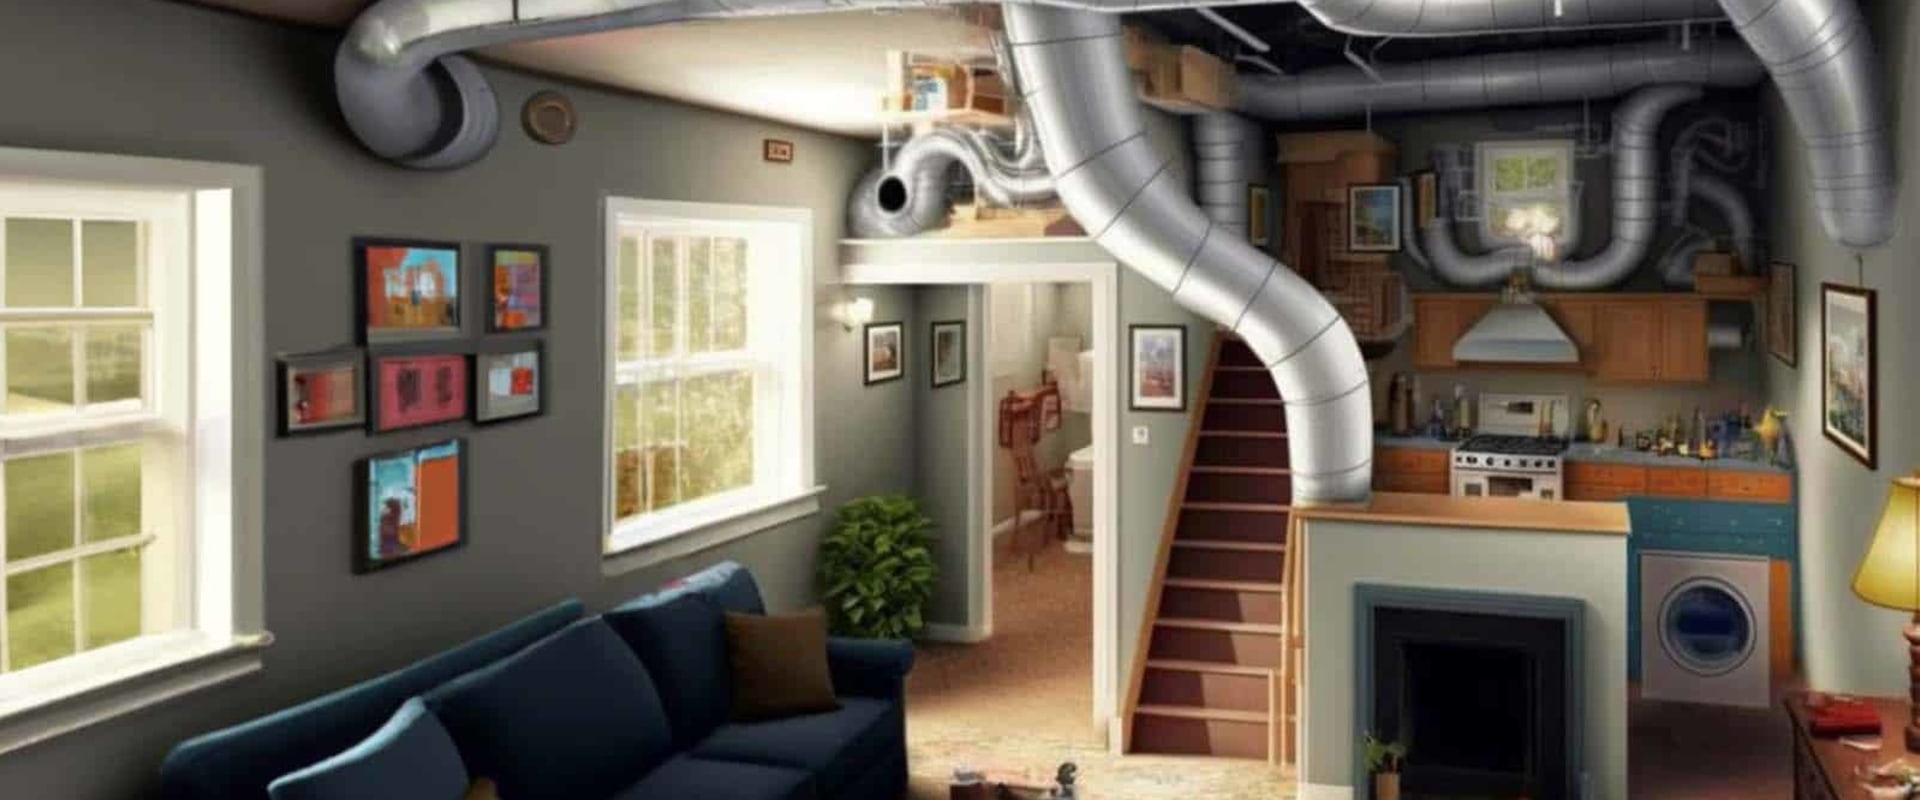 Replacing Your HVAC System in West Palm Beach, FL: What Type of Ductwork Should You Choose?